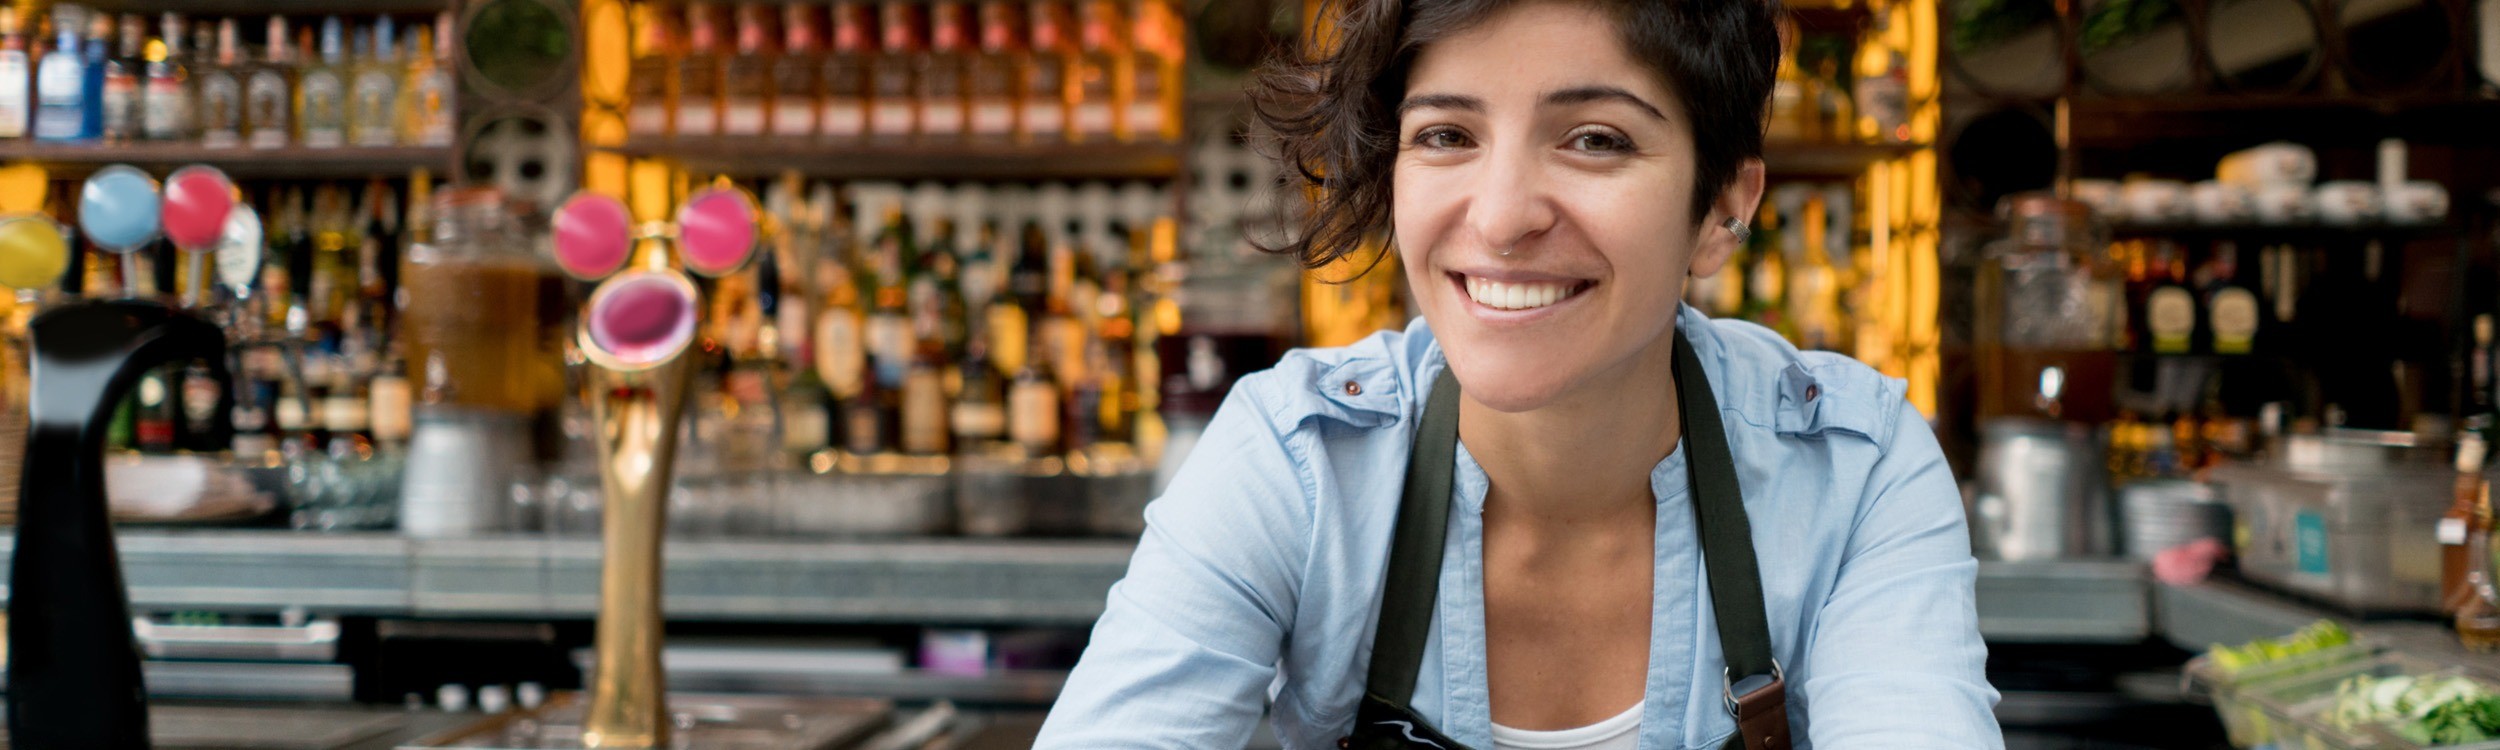 female smiling in fron of a bar